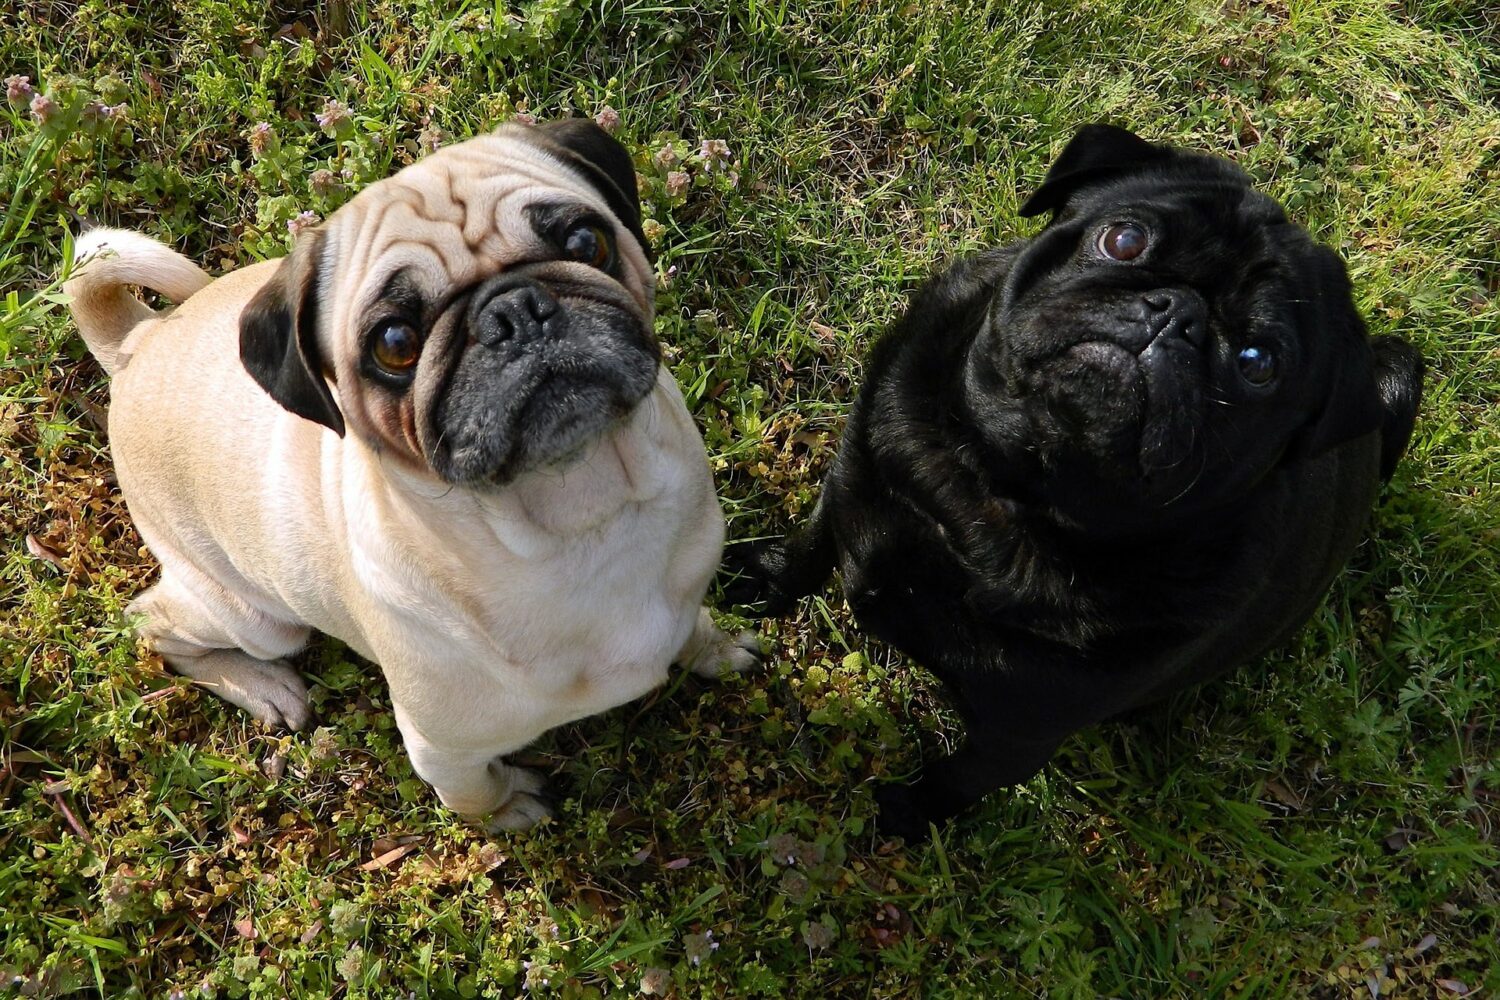 The Adorable Pug: A Guide to Everything You Need to Know About This Popular Breed